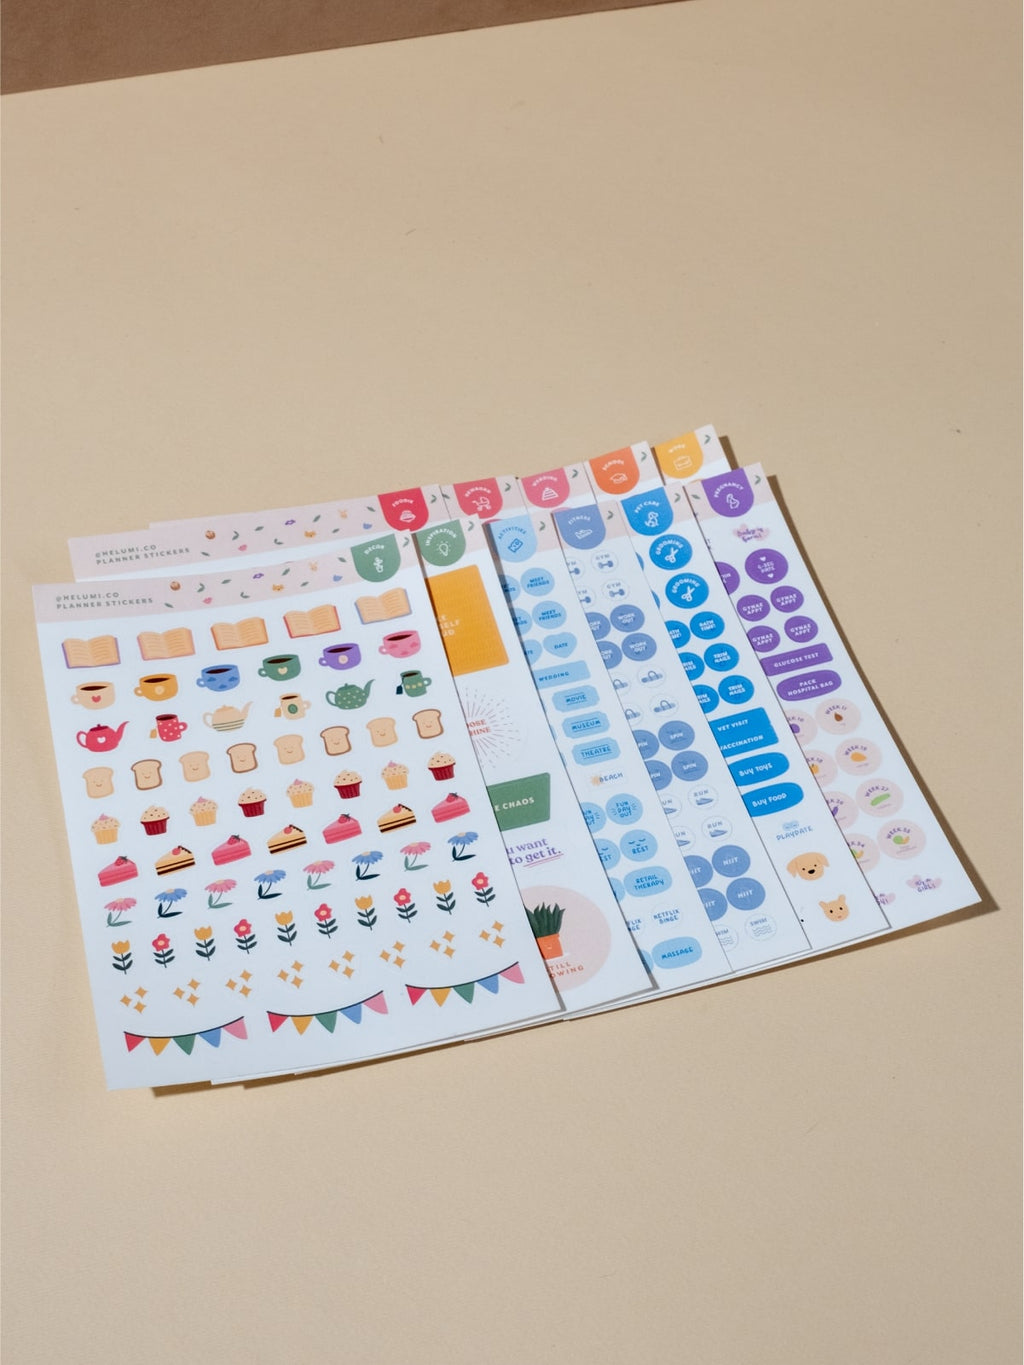 Activities - Colour-coded Planner Sticker Sheet